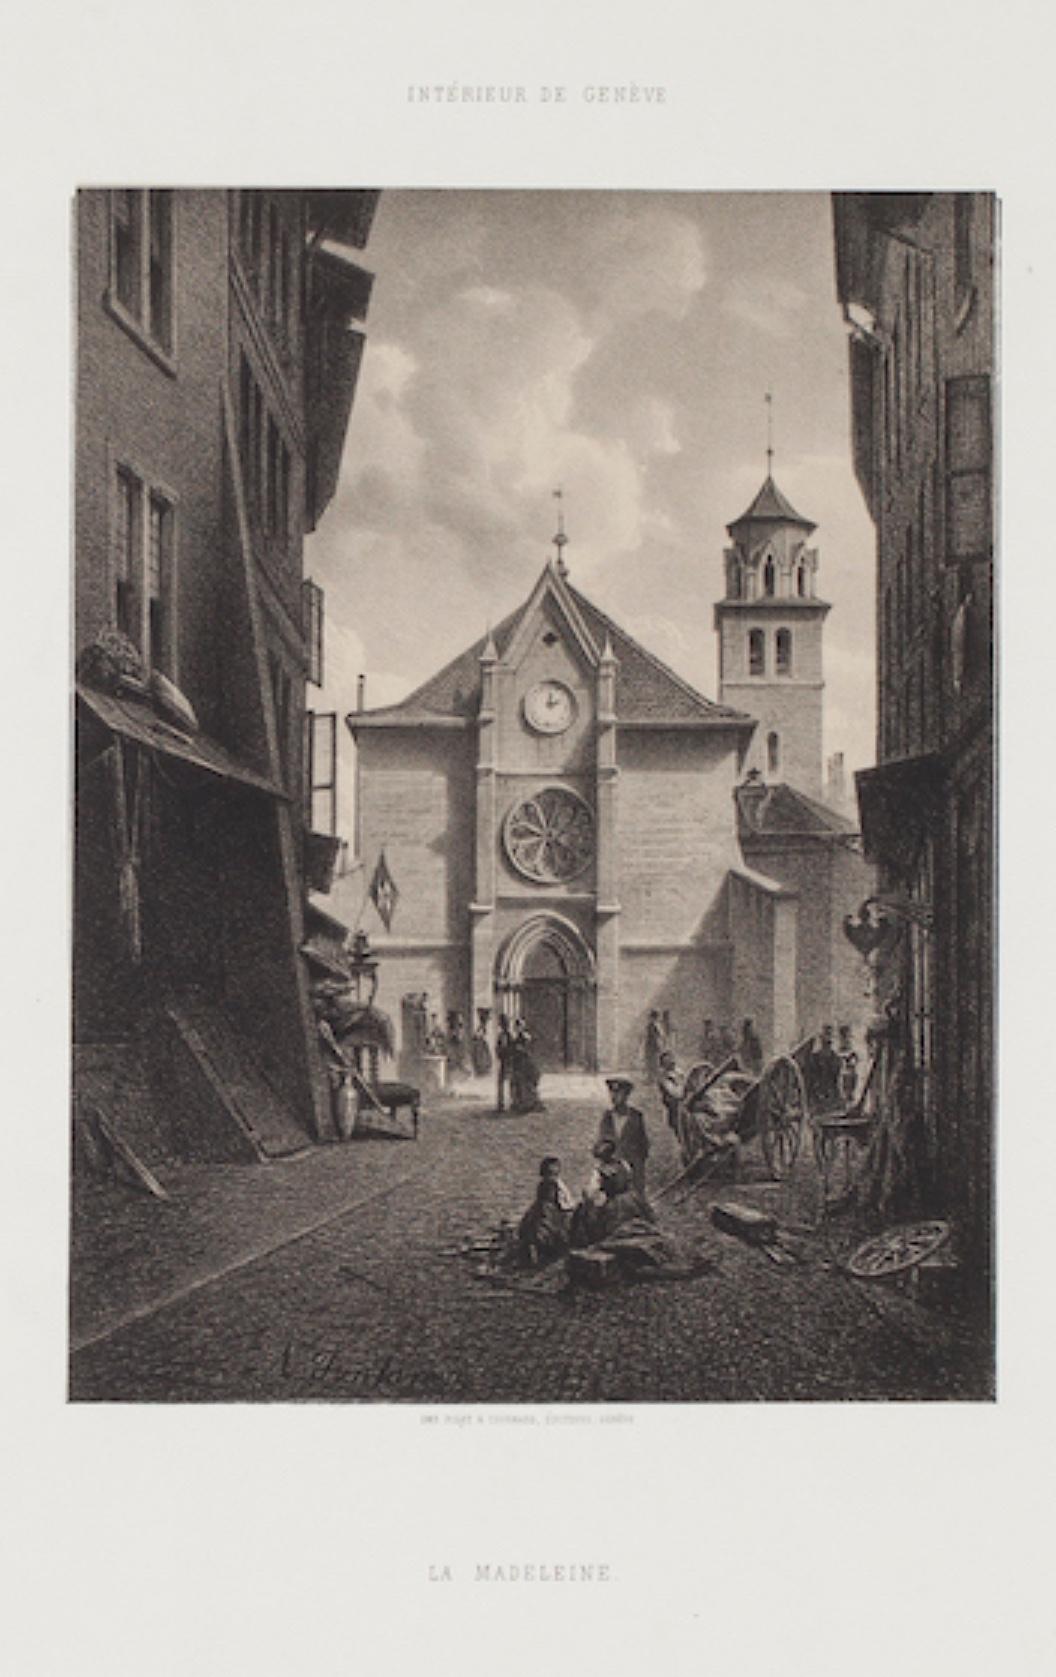 The Interior of Geneva is an original Lithpgrapg by  Antonio Fontanesi in the 19th Century.

The state of preservation of the artwork is excellent. Image Dimensions:  20 x 15 cm

The signature is engraved on the plate the lower left. At the top of